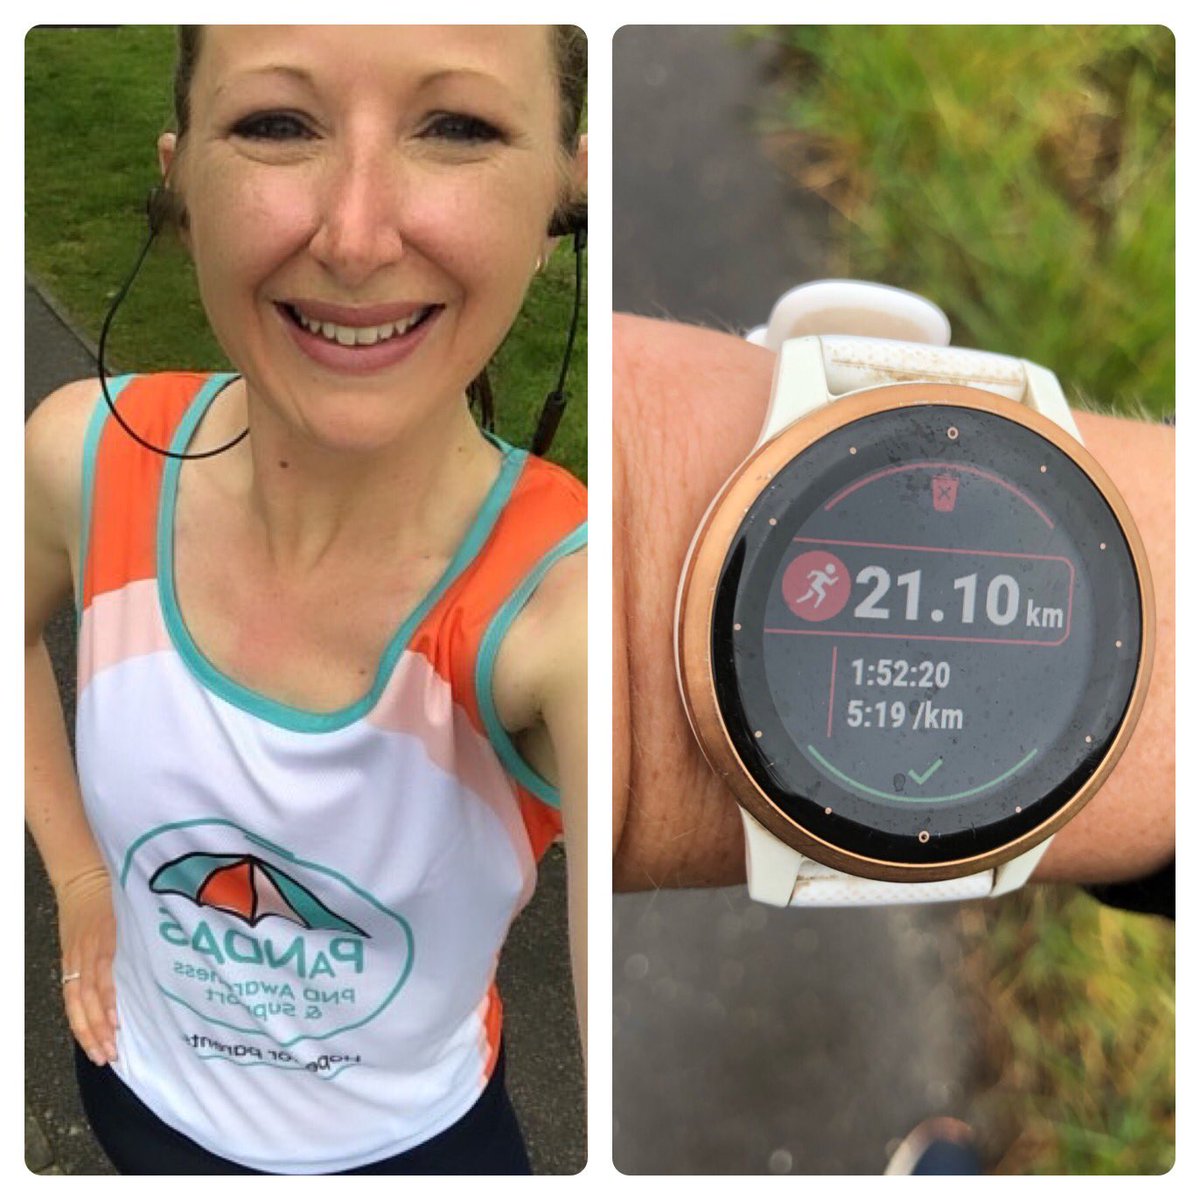 So as #MMHAW21 comes to a close, today was half marathon day! 

It was wet and wild out there this morning, but with incredible support I completed it in 1 hour 52 minutes and have raised over £350 for @Pandas_uk  so far. 

@iHealthVisiting